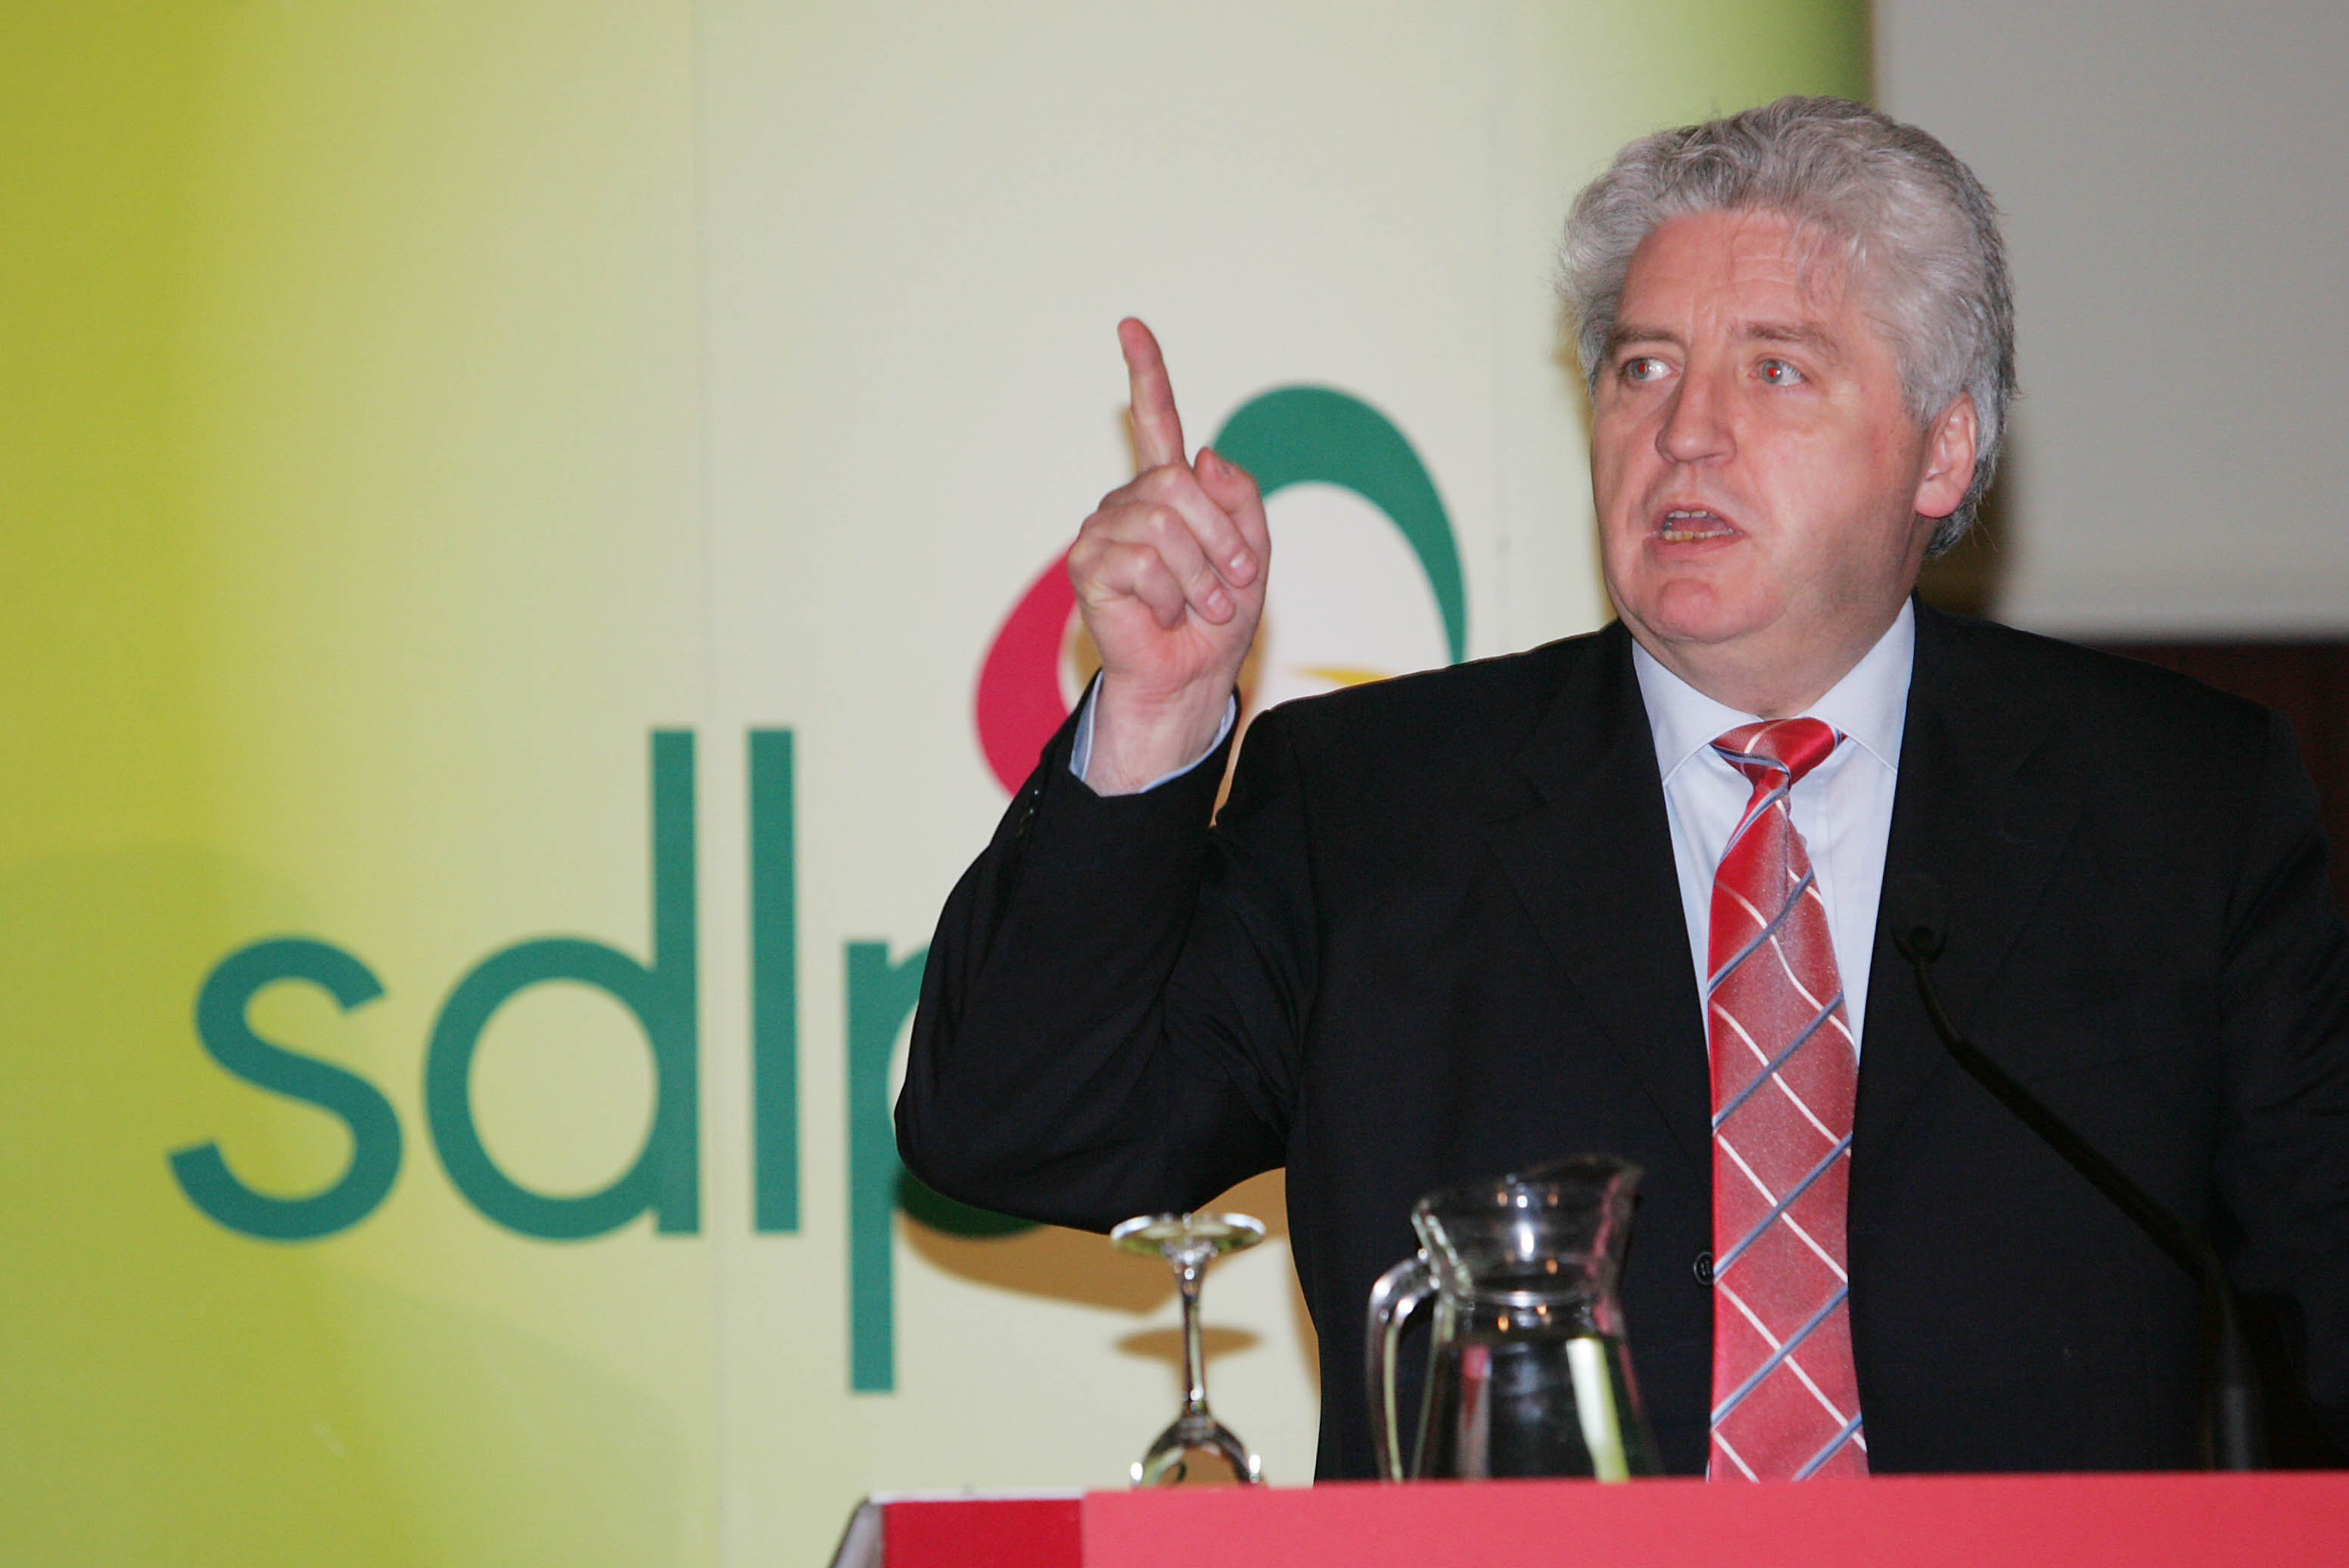 The SDLP’s Alasdair McDonnell was returned as MP for South Belfast